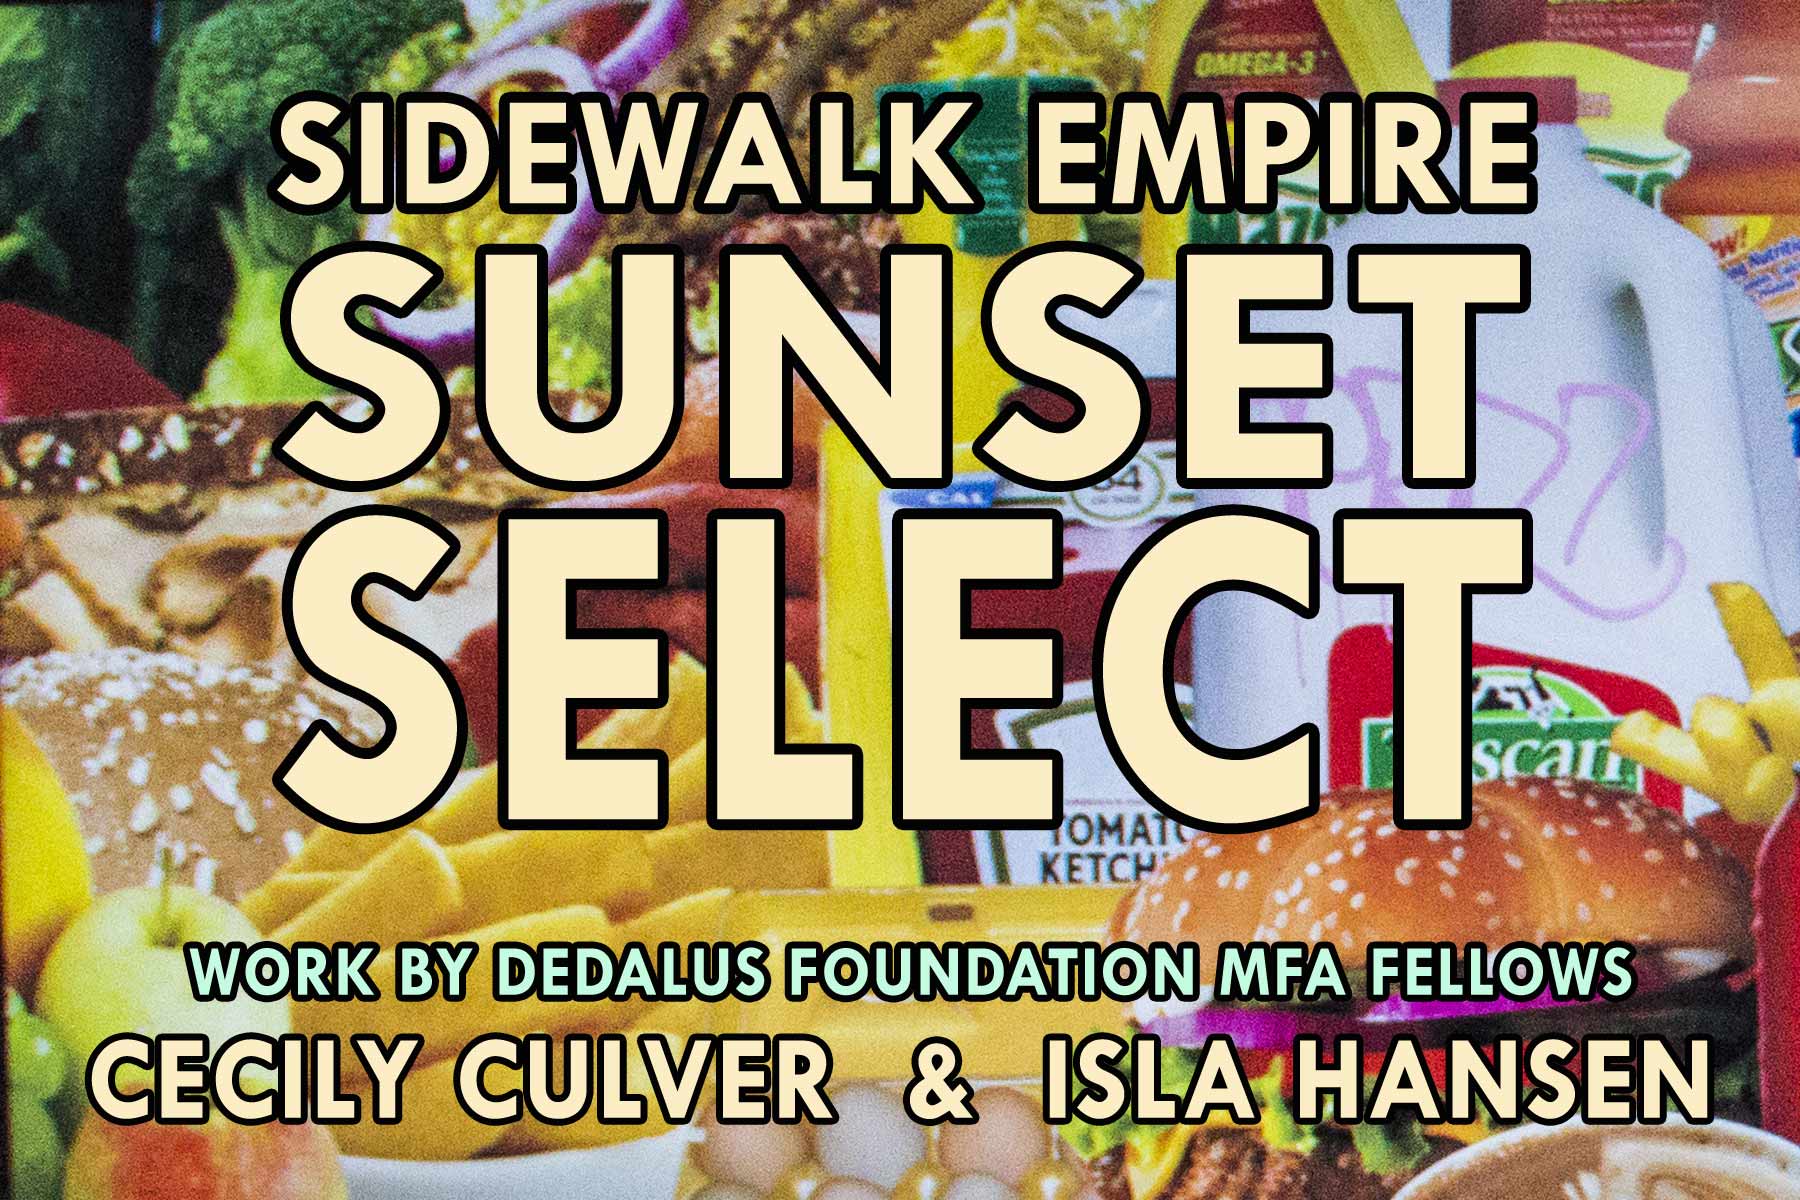 An exhibition postcard featuring images of food with the text "Sidewalk Empire Sunset Select / Work by Dedalus Foundation MFA Fellows Cecily Culver & Isla Hansen"